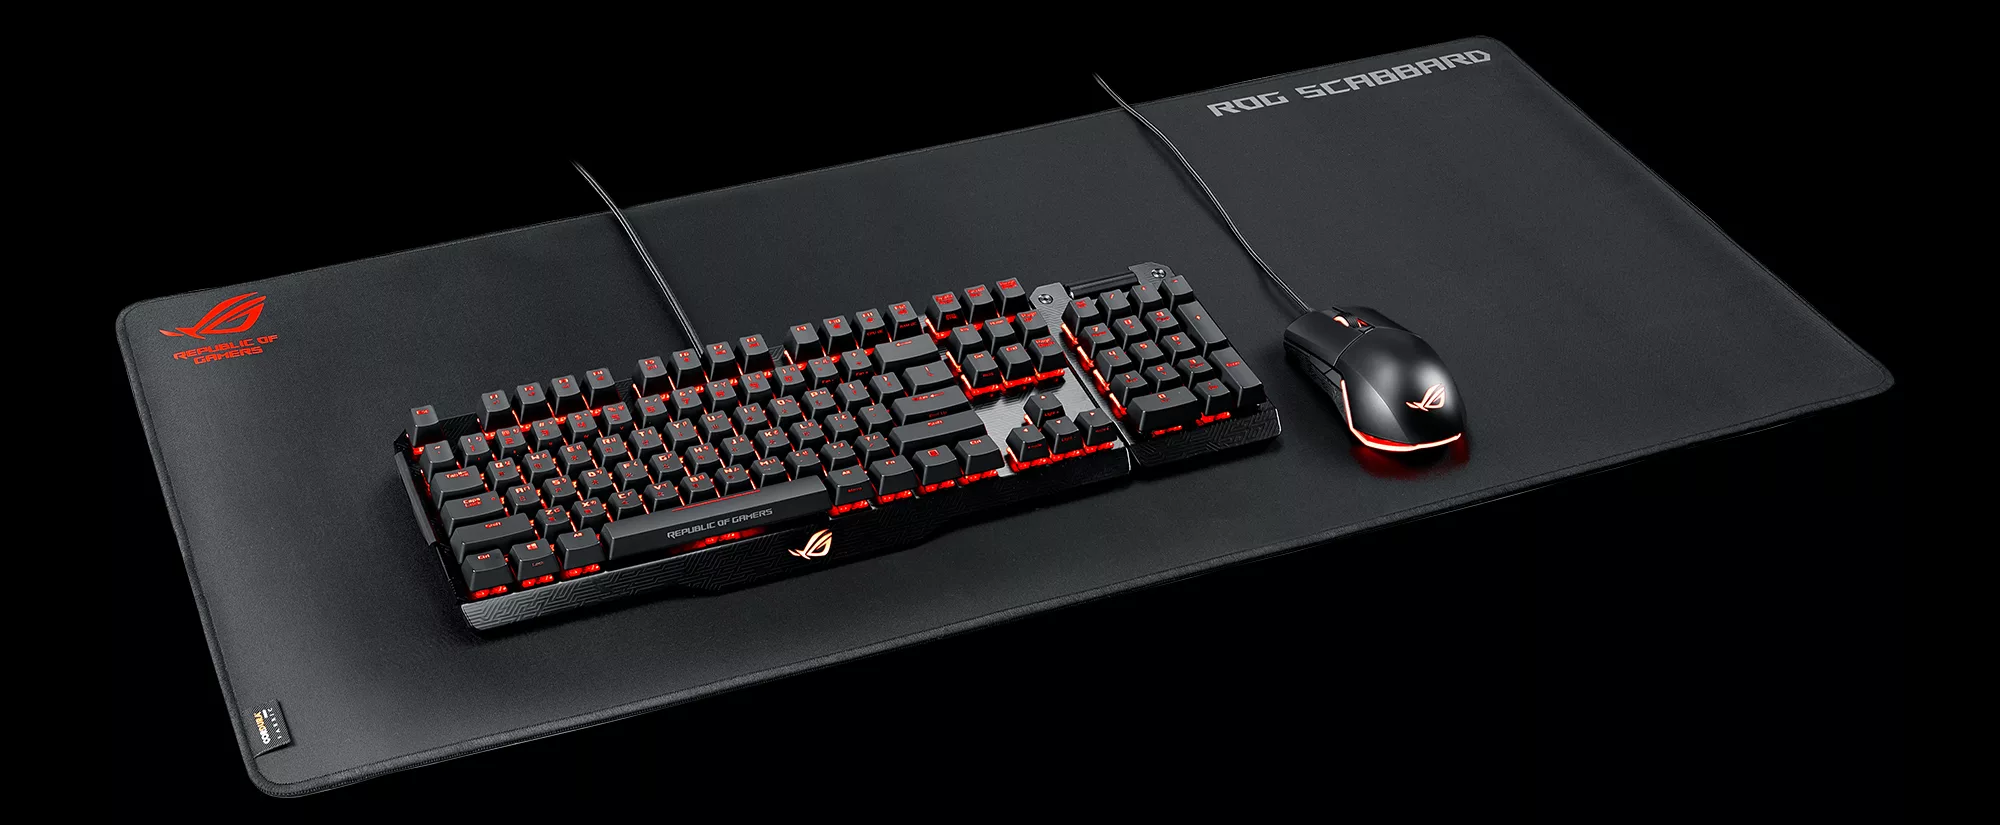 ROG-Scabbard-3D-Extended-Mouse-Pad